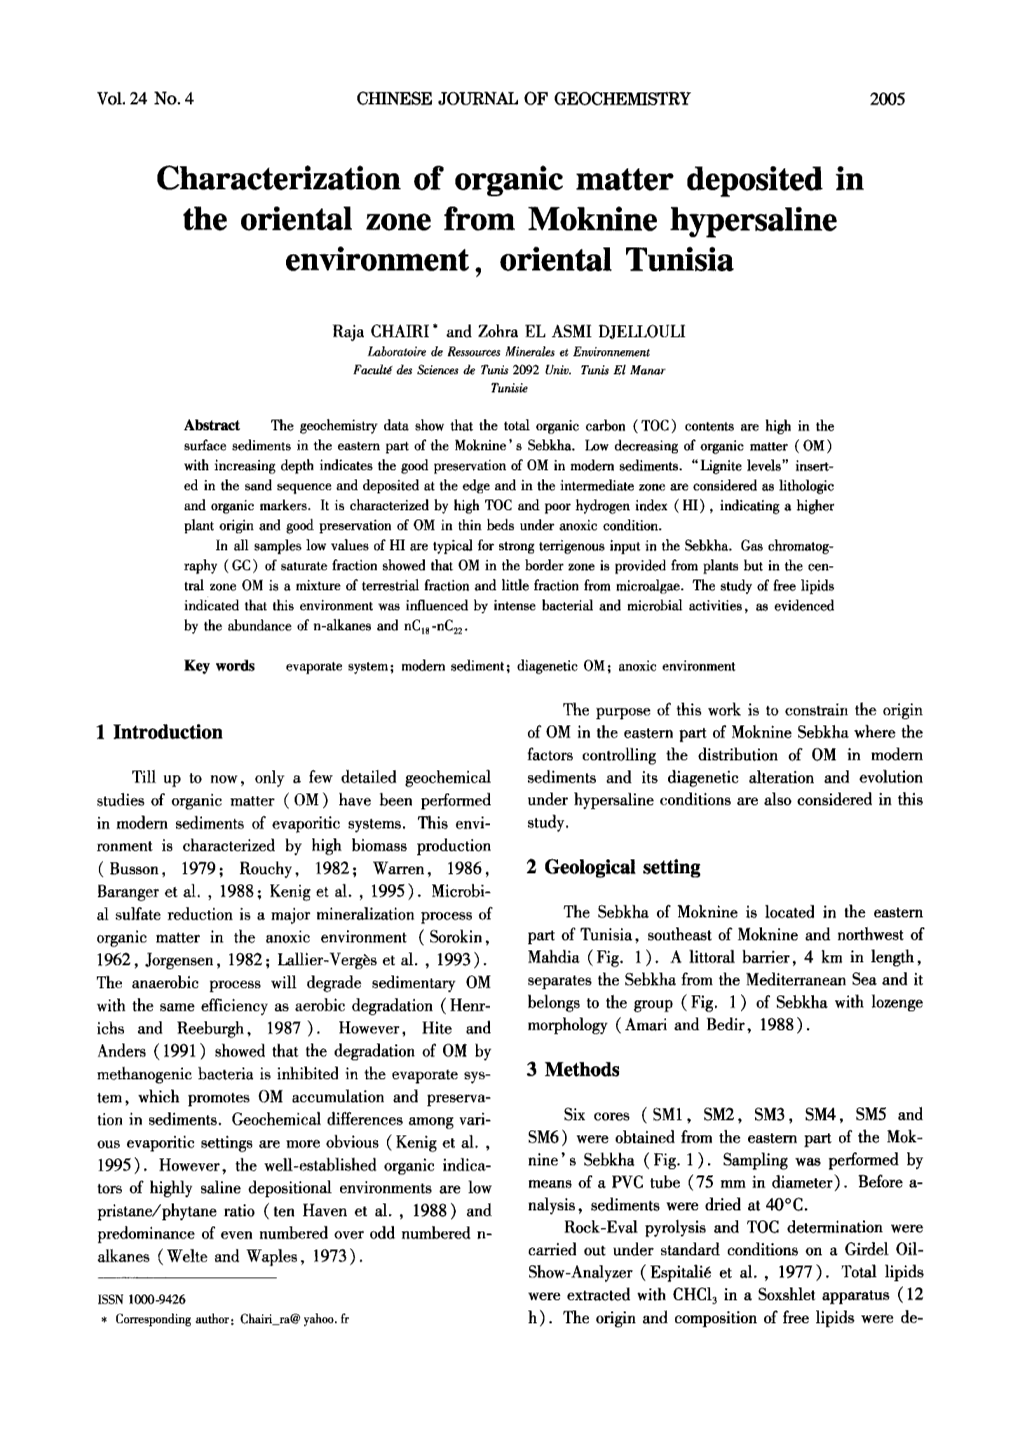 Characterization of Organic Matter Deposited in the Oriental Zone from Moknine Hypersaline Environment, Oriental Tunisia